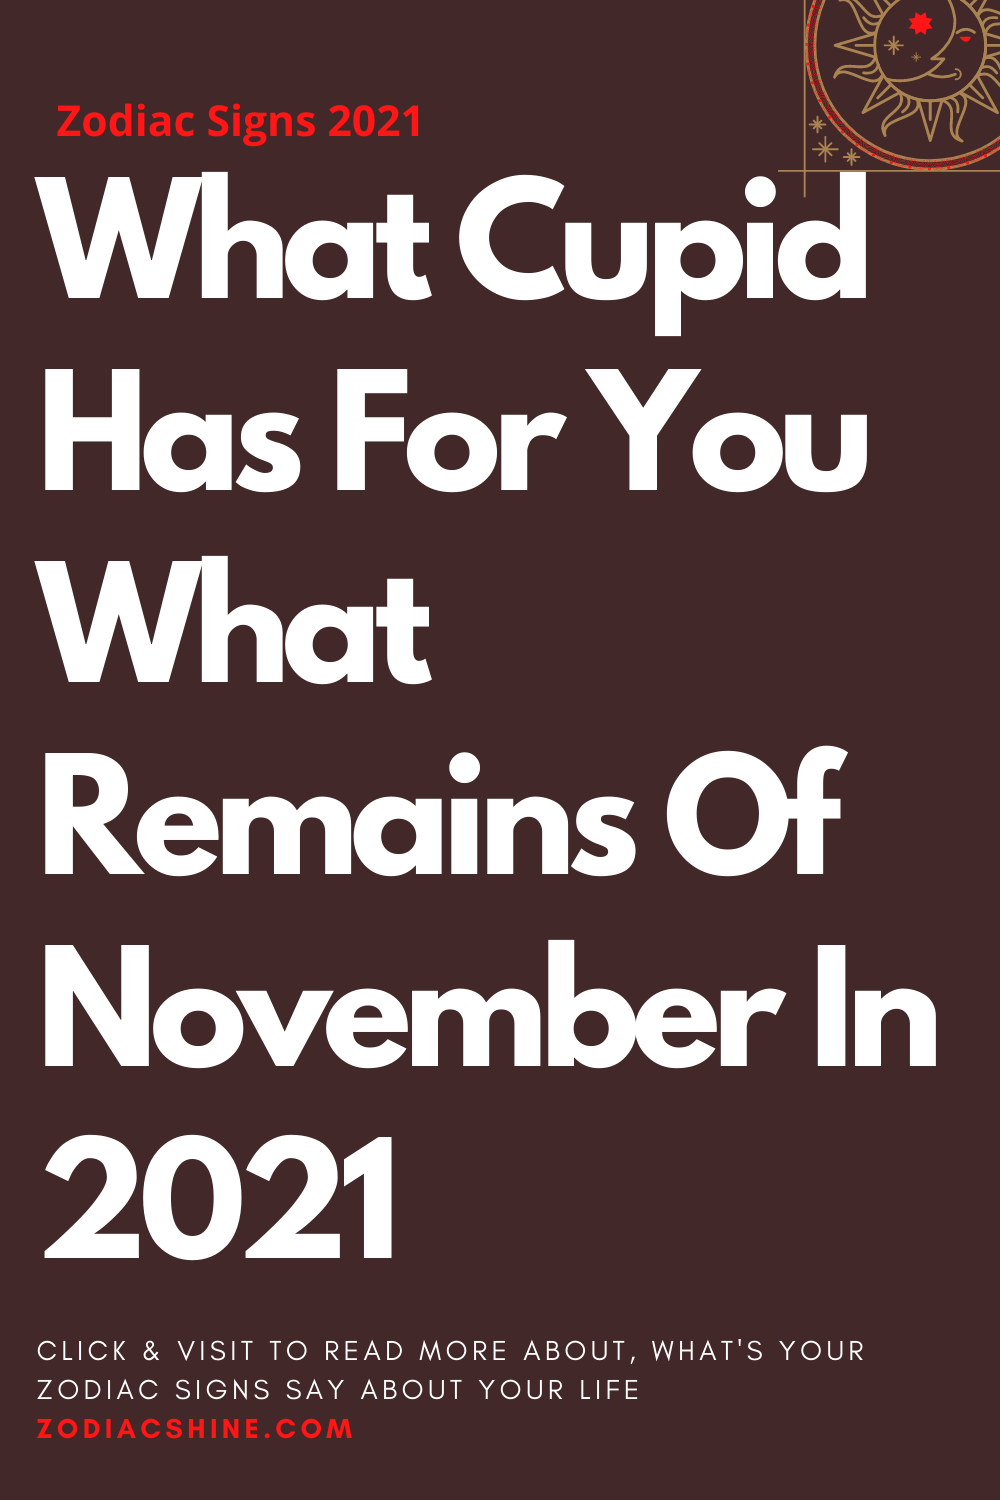 What Cupid Has For You What Remains Of November In 2021